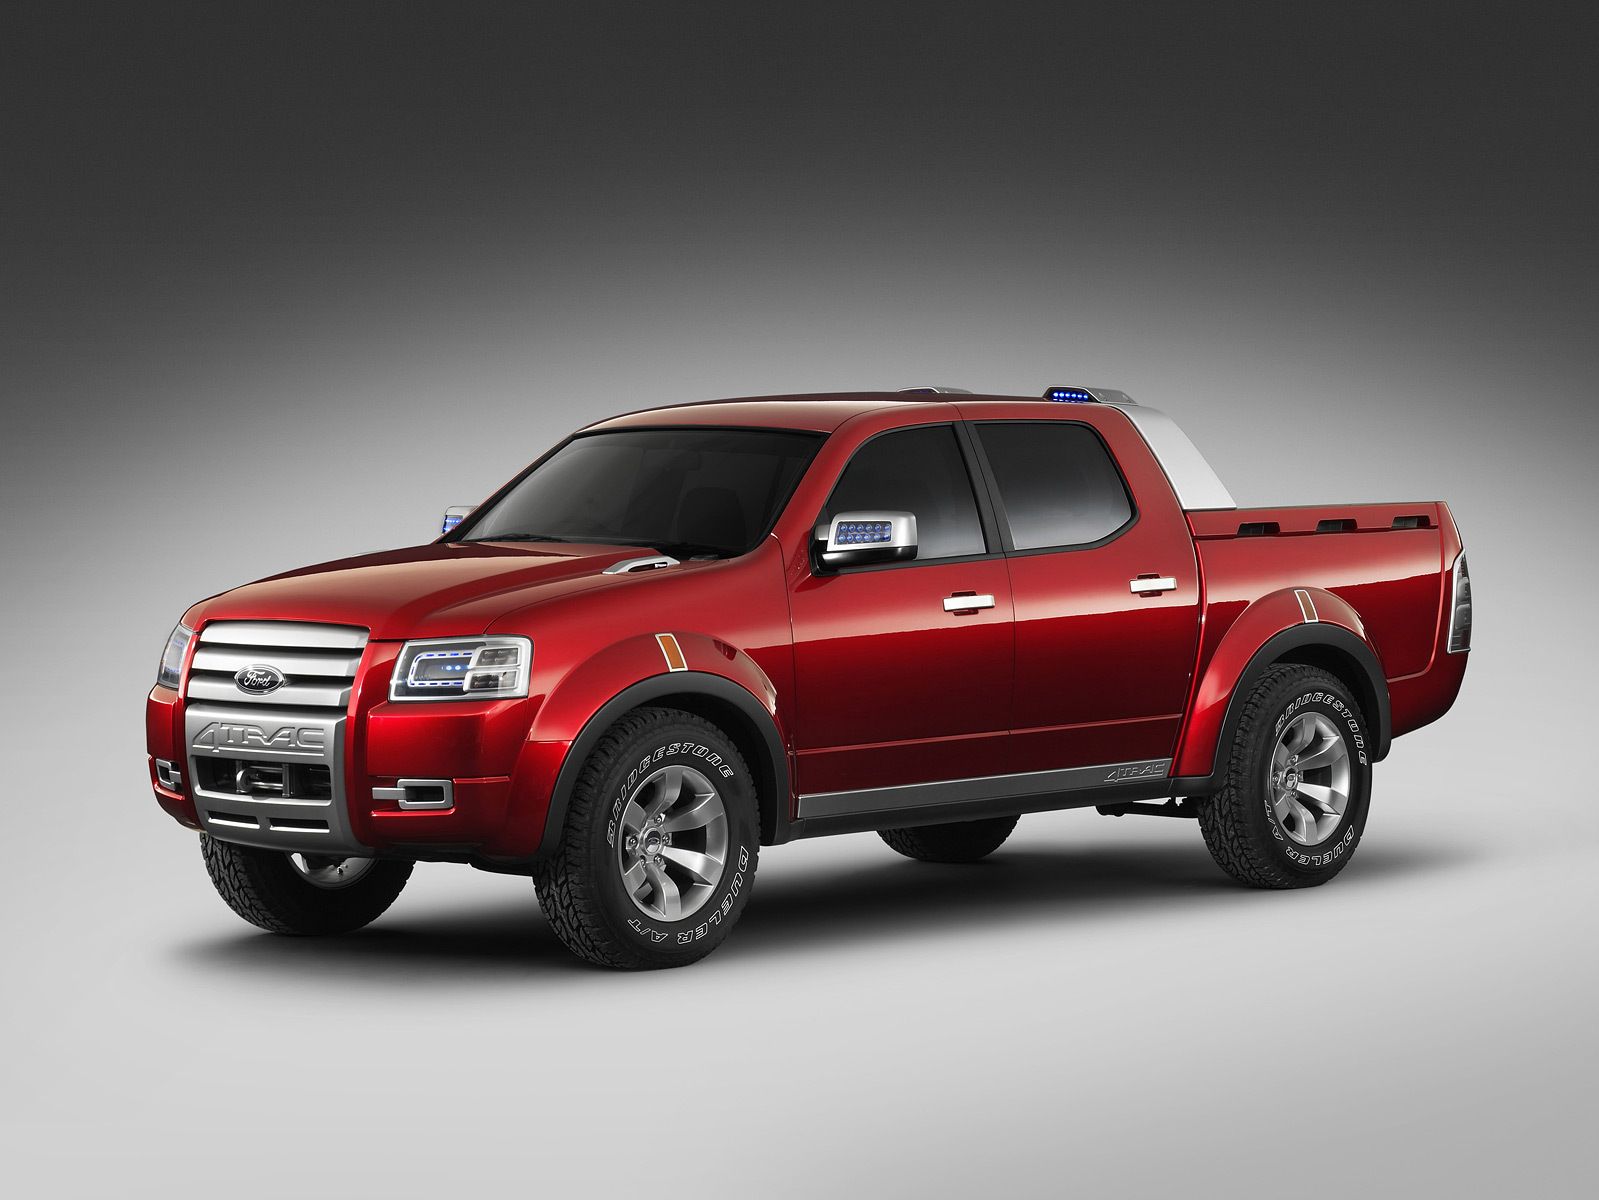 Ford 4-Trac Concept Pick-Up Truck Wallpapers - HD Wallpapers 51278